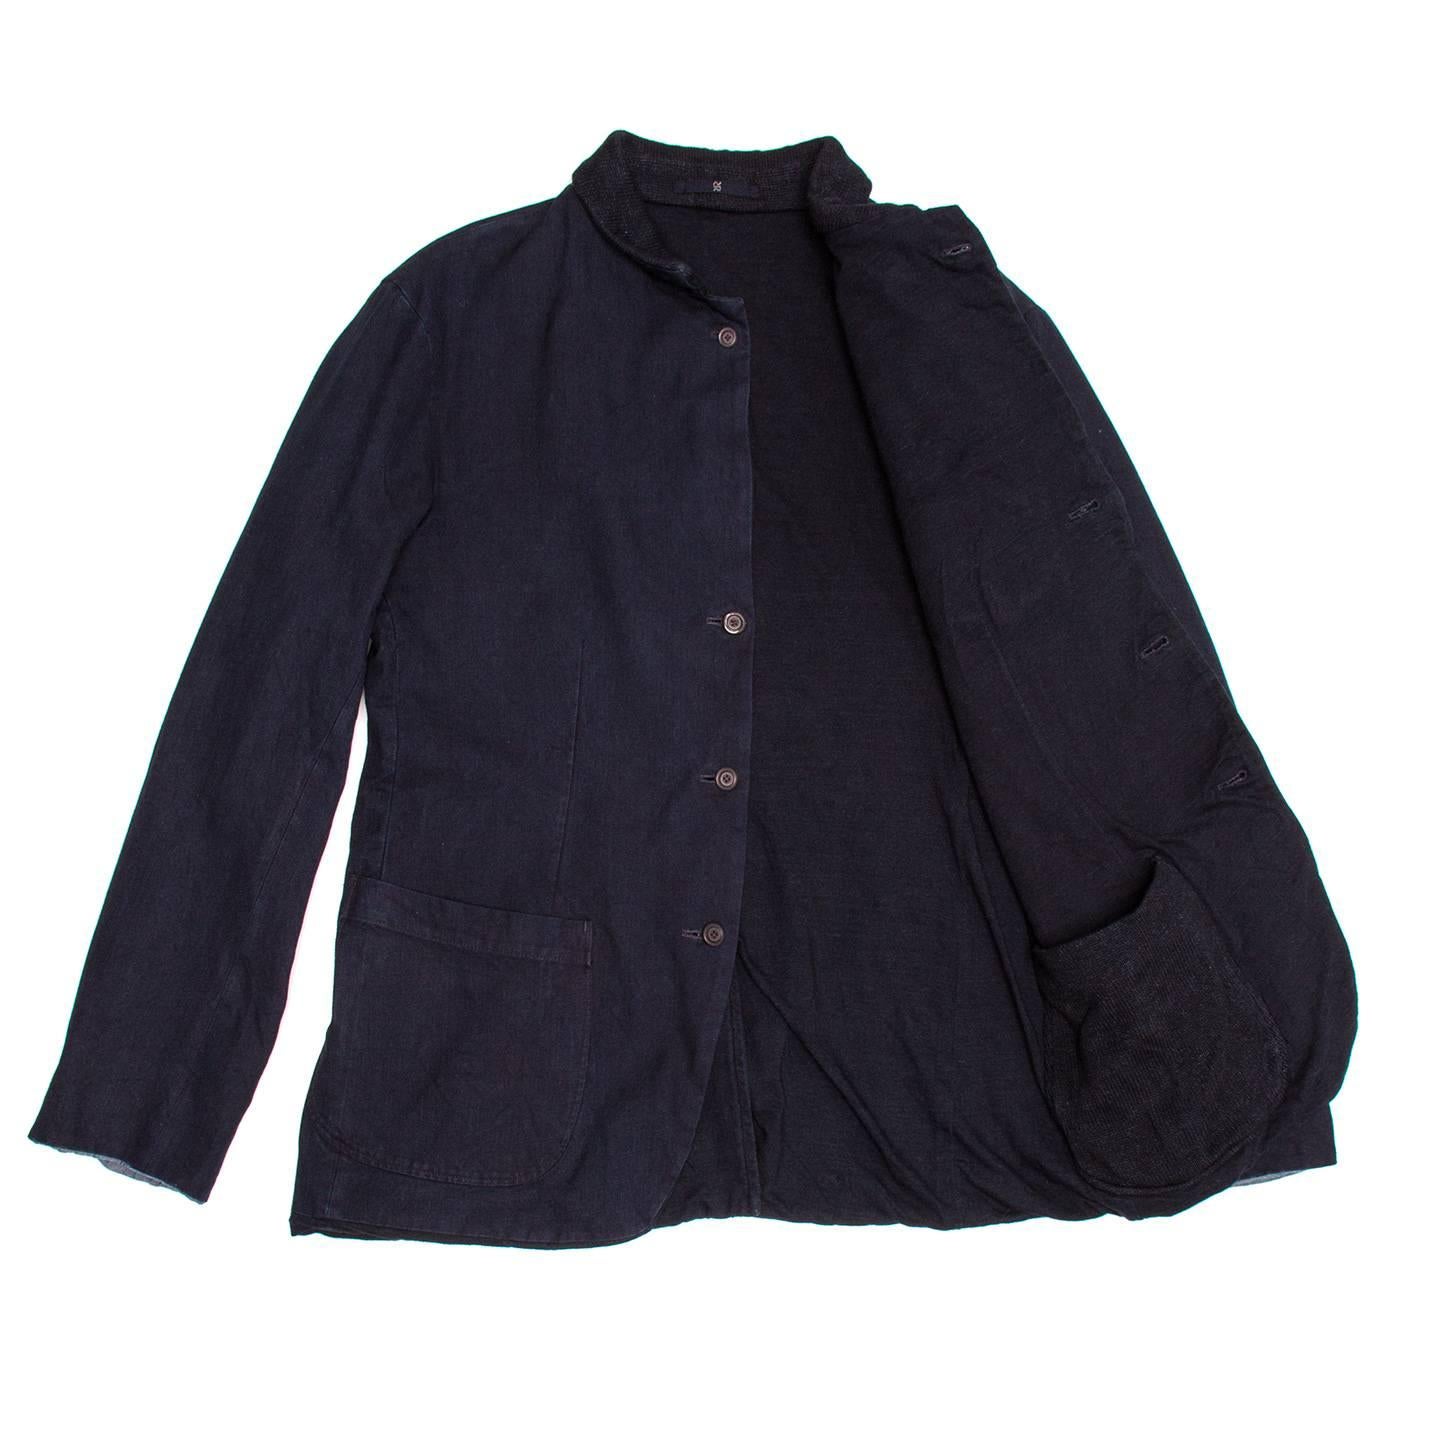 Reversible navy blue spring cotton jacket, hip length with back vent. One side of the jacket is made of woven, it has a breast pocket, two patch pockets and the convertible neck folds showing a knitted collar. If worn on the opposite side the jacket